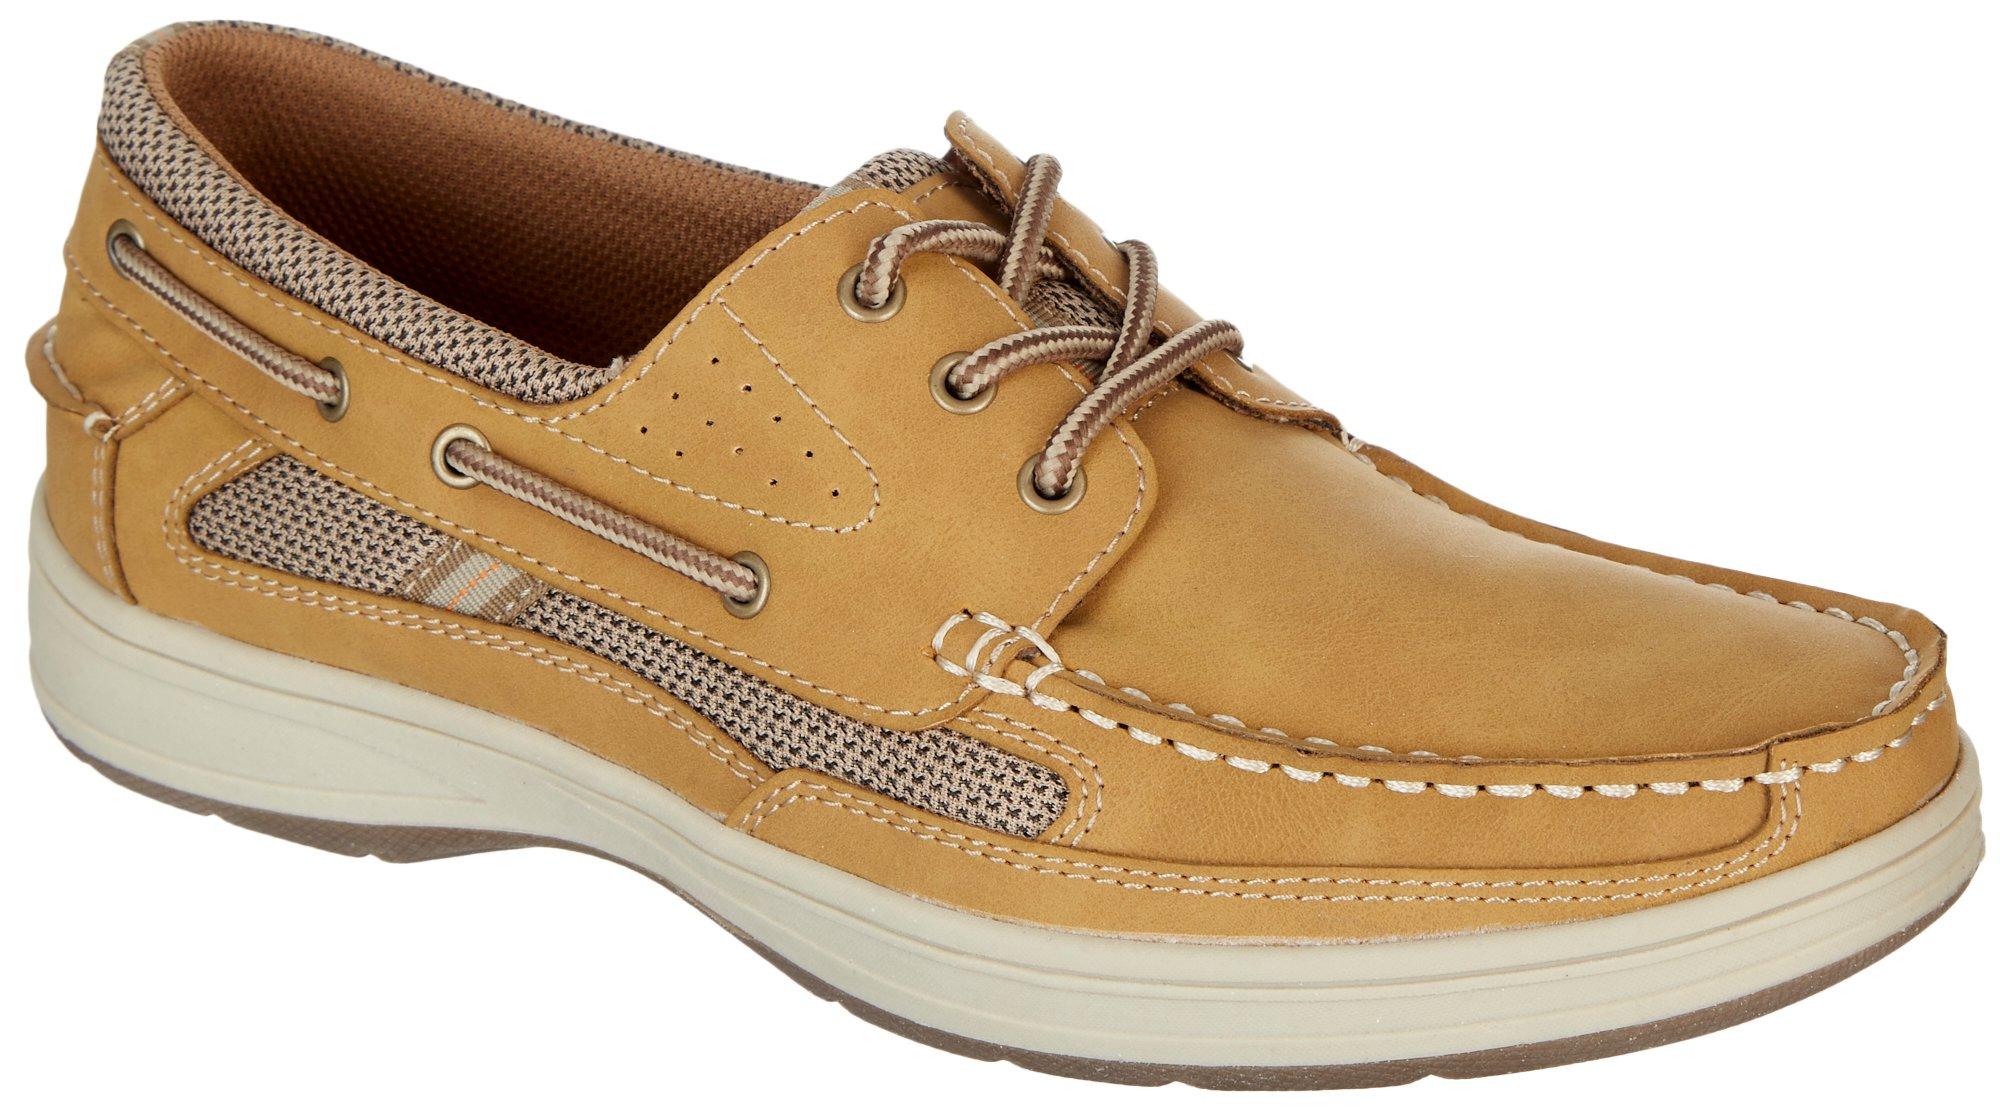 Reel Legends Mens Outrigger Casual Sports Boat Shoes